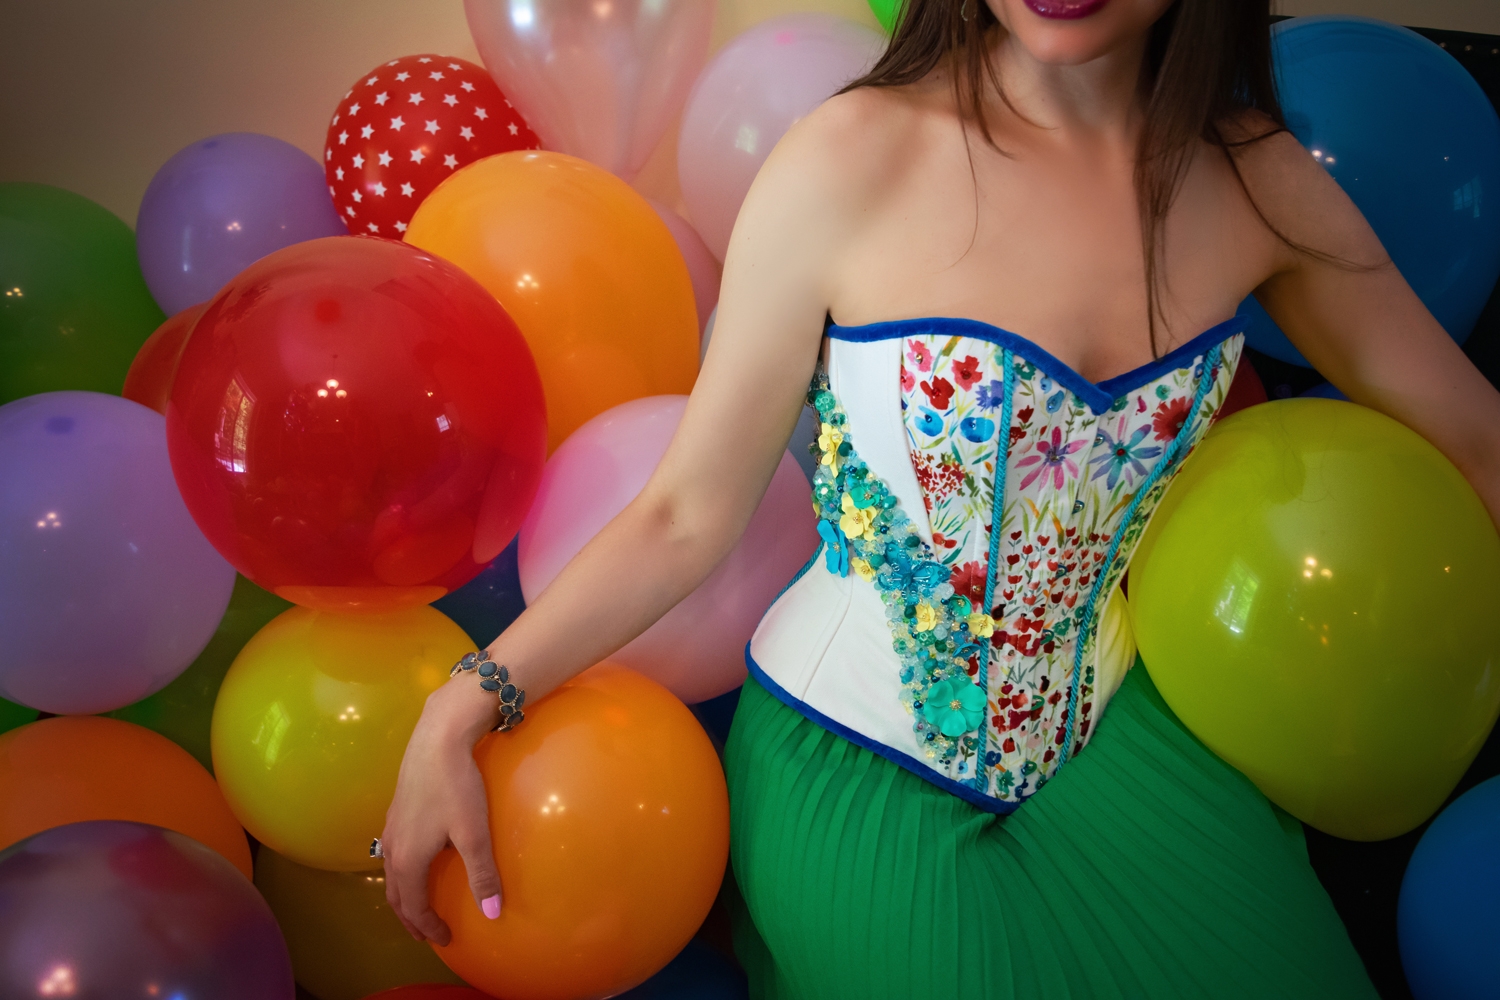 Stella celebrating her birthday surrounded by balloons.